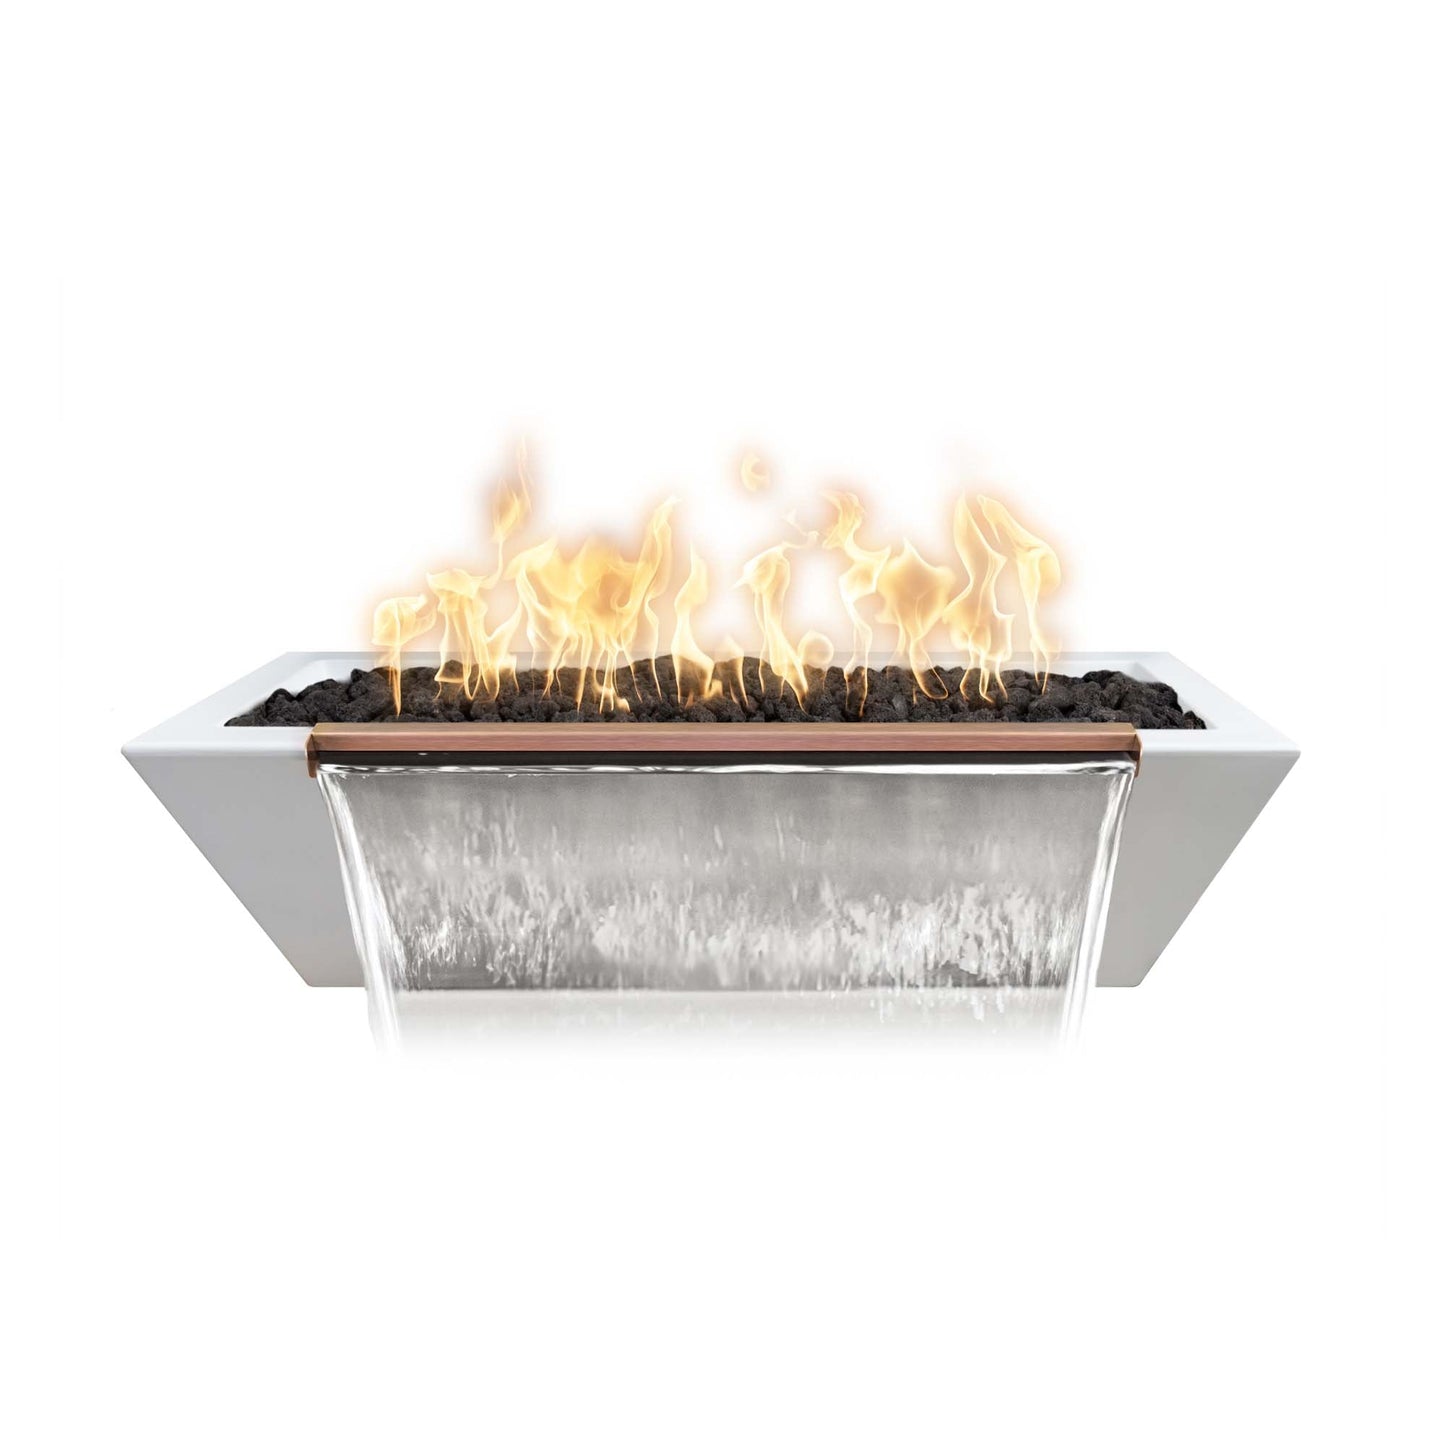 The Outdoor Plus Linear Maya 60" Gray GFRC Concrete Liquid Propane Fire & Water Bowl with 12V Electronic Ignition